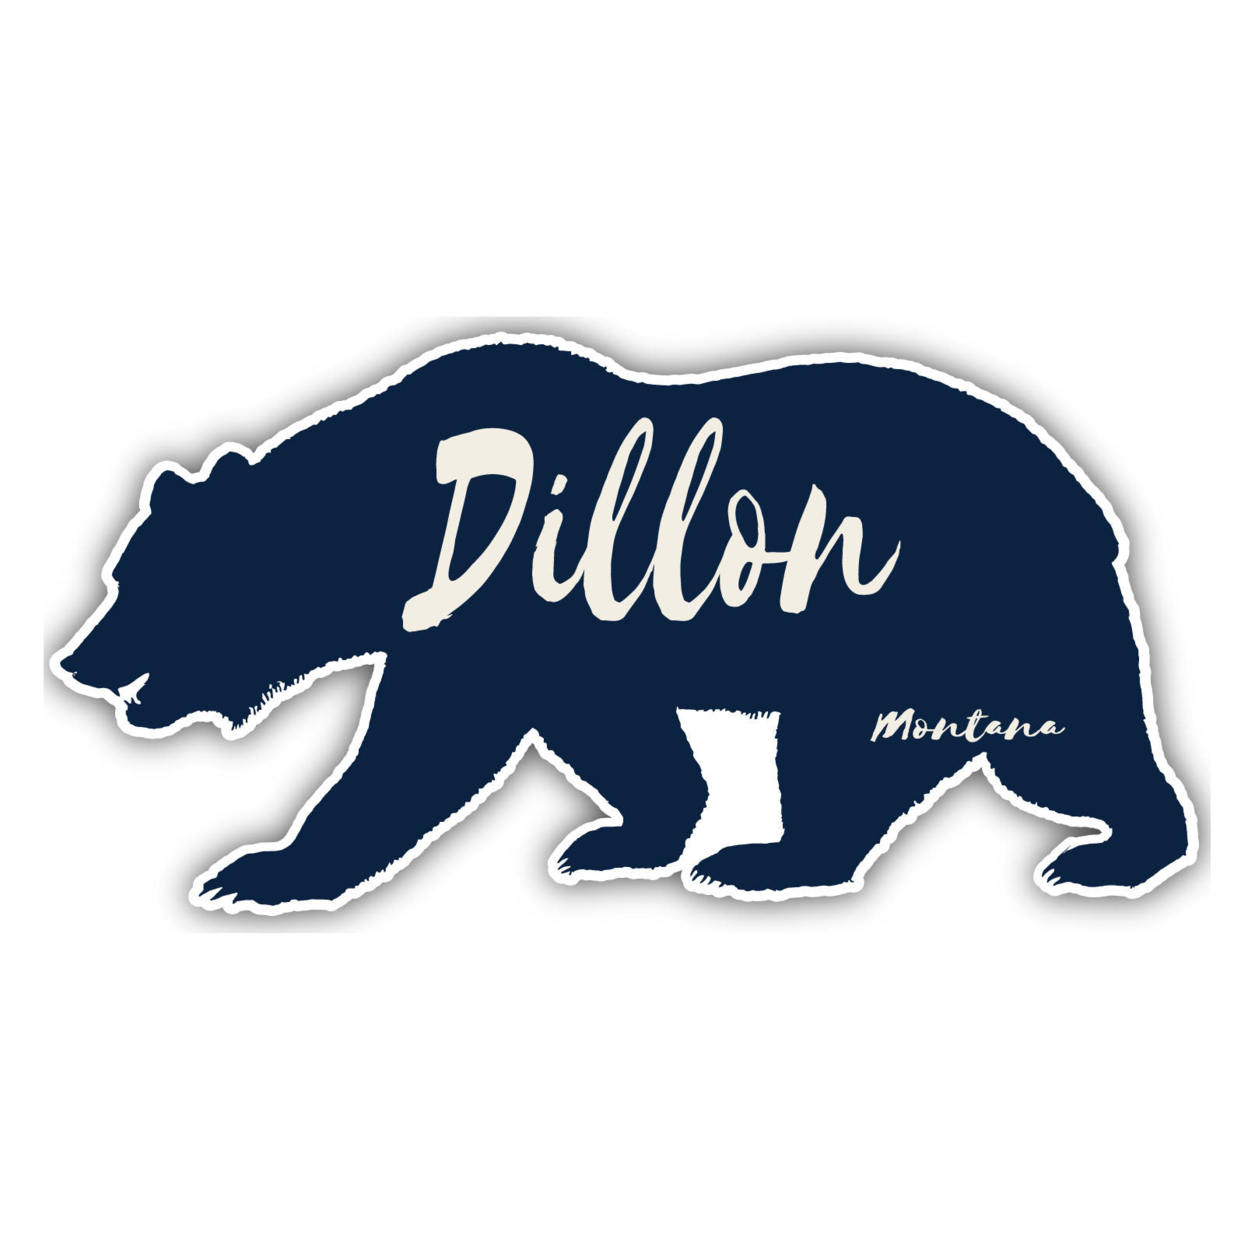 Dillon Montana Souvenir Decorative Stickers (Choose Theme And Size) - 4-Pack, 12-Inch, Camp Life